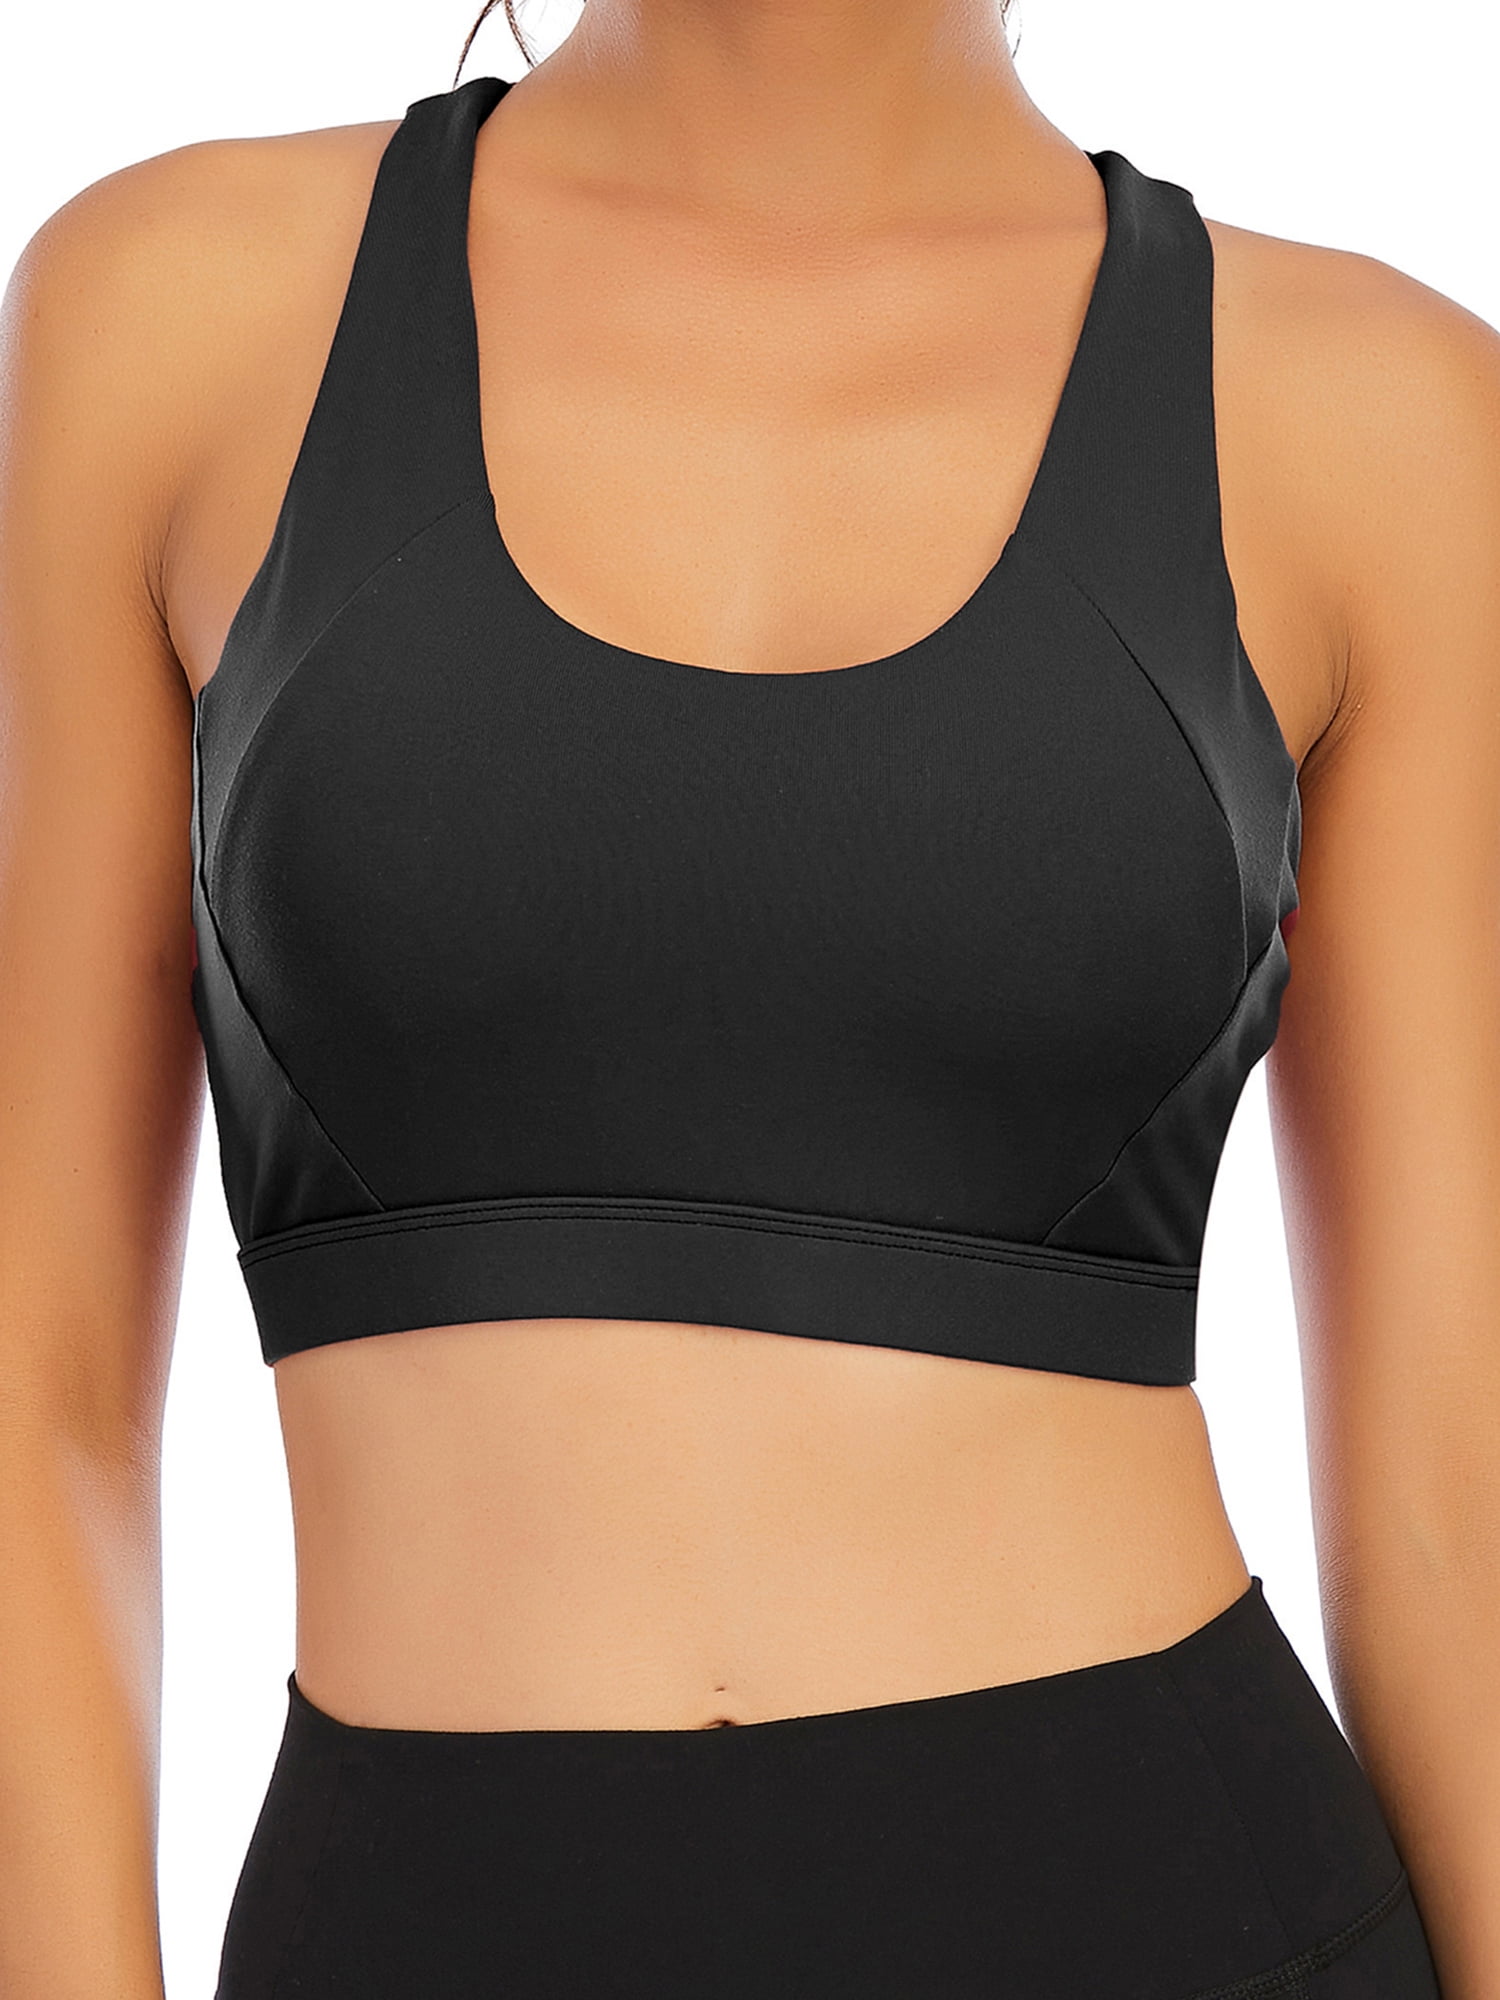 Workout Tank Tops for Women Sexy Halter Crop Tops Exercise Fitness Gym Yoga  Running Shirt Longline Sports Bras for Women